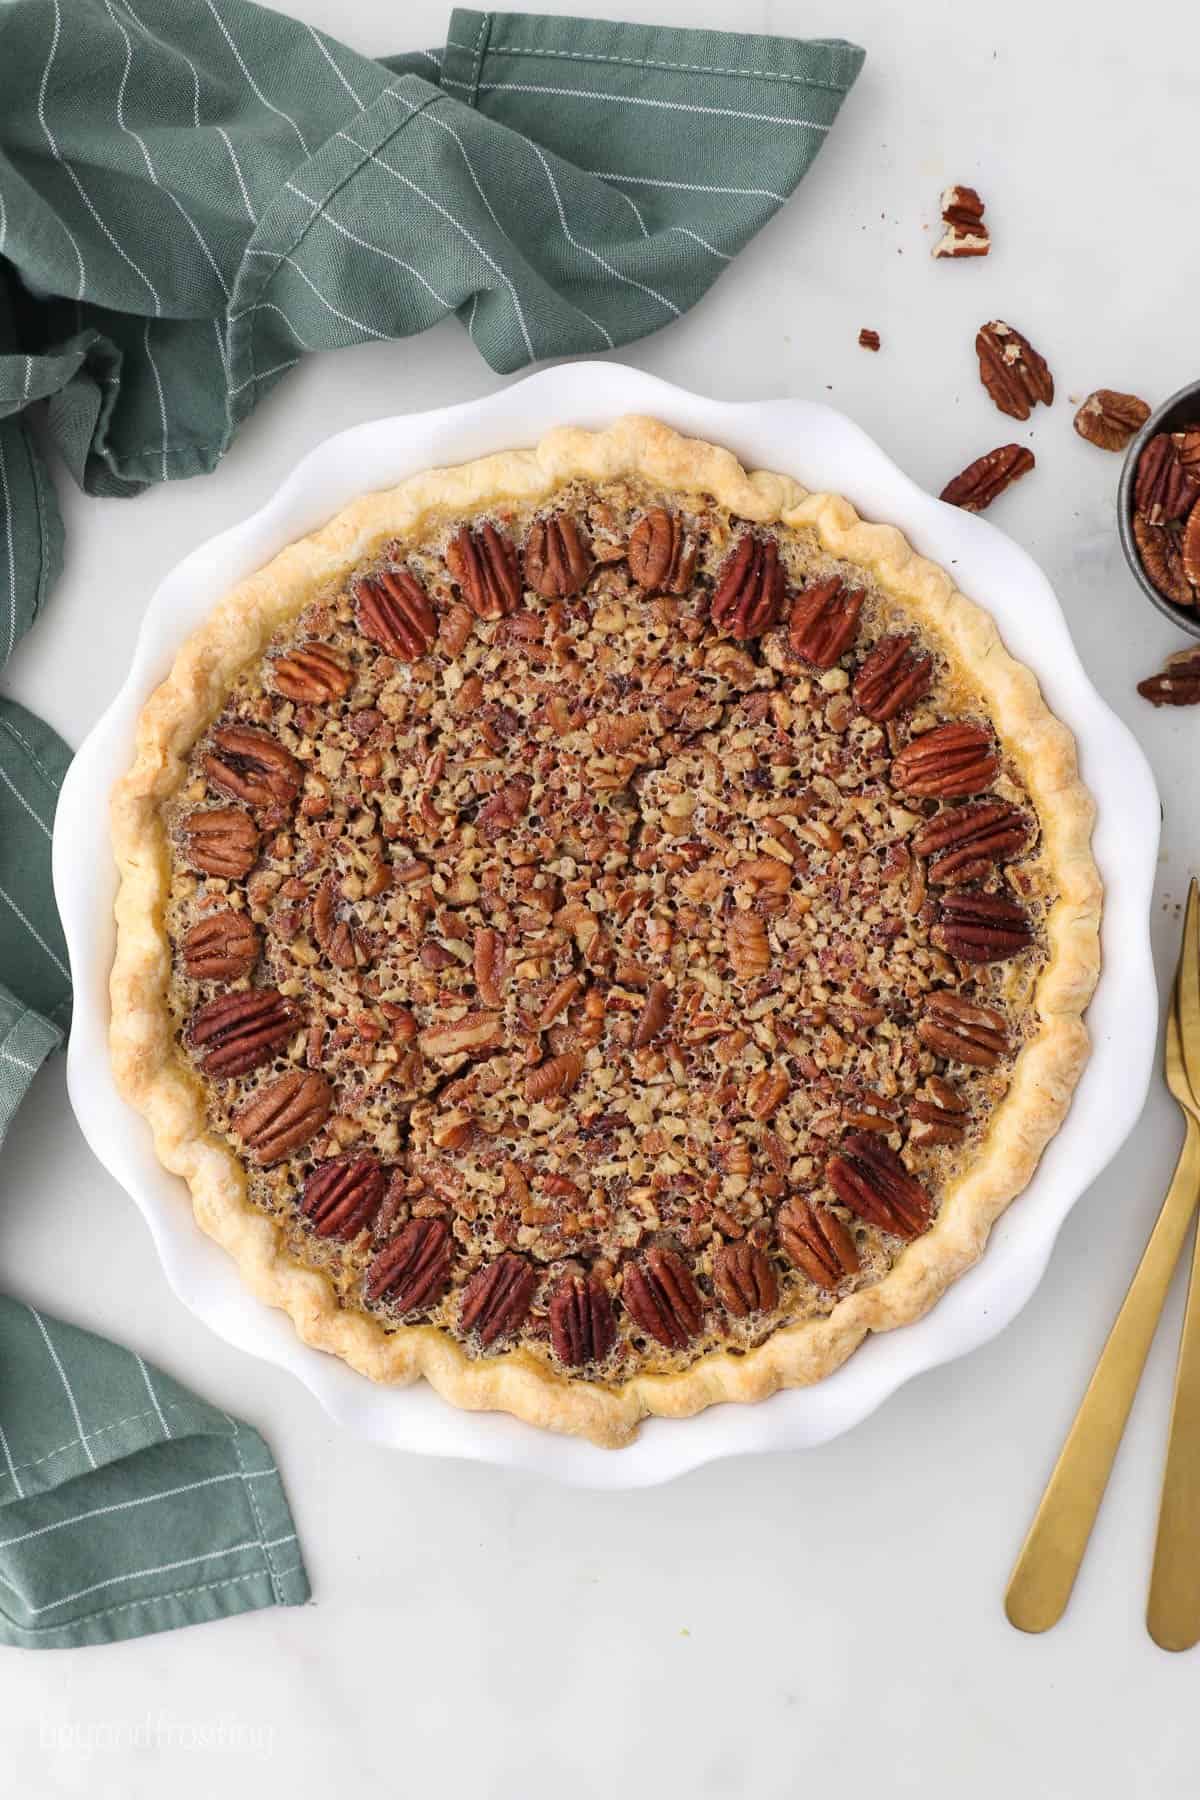 A Kahlua pecan pie in a pie plate on a countertop beside a kitchen towel